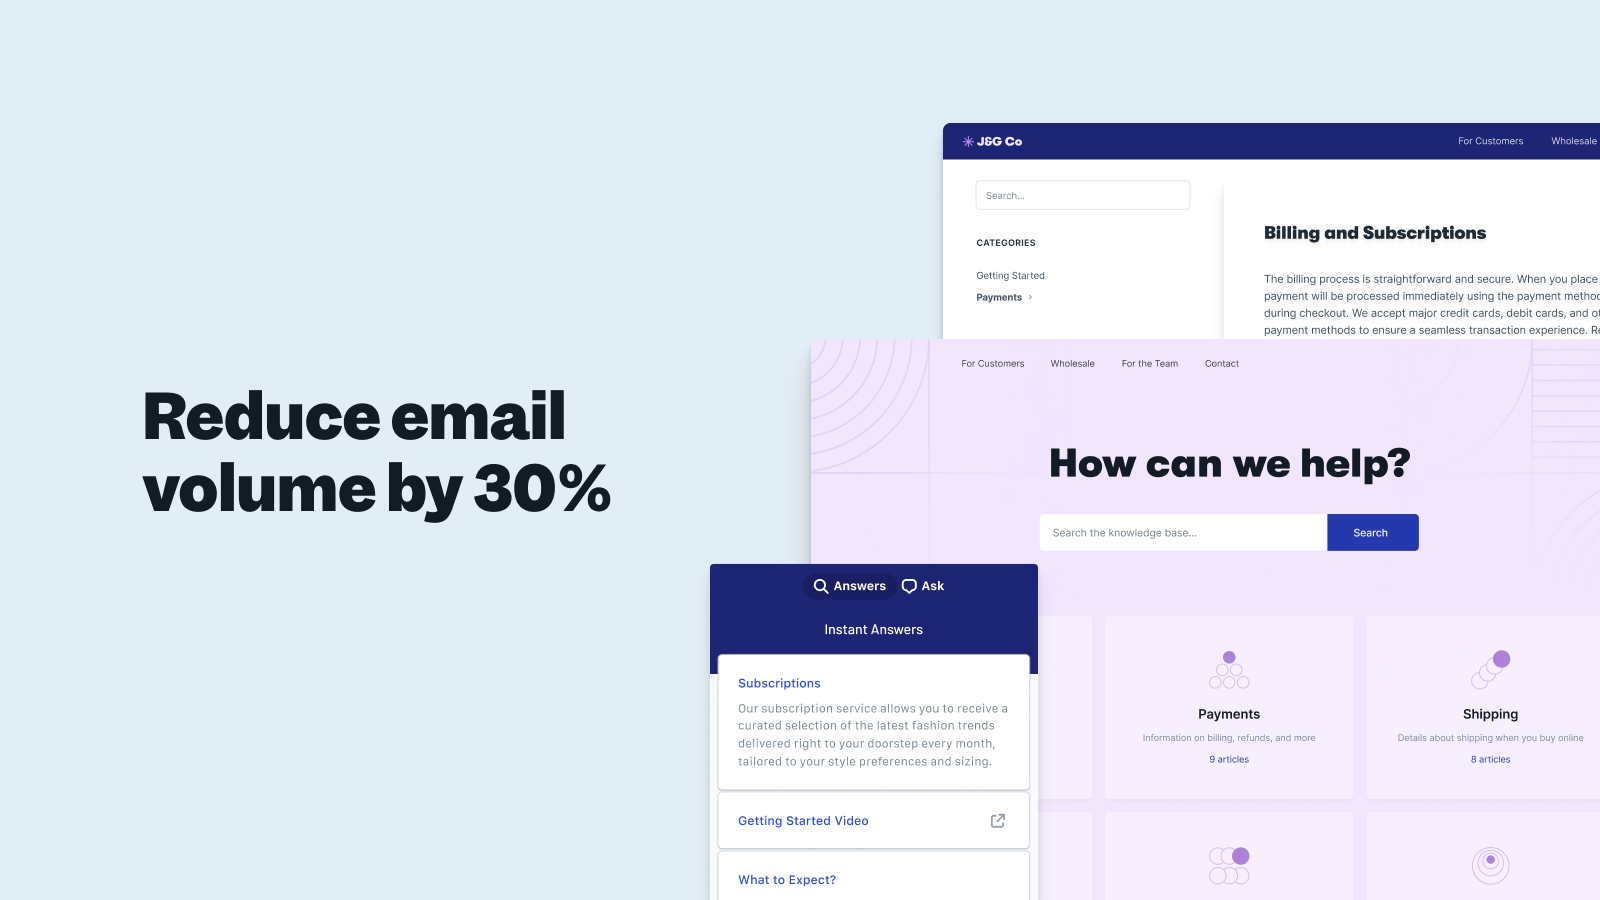 Reduce email volume by 30%